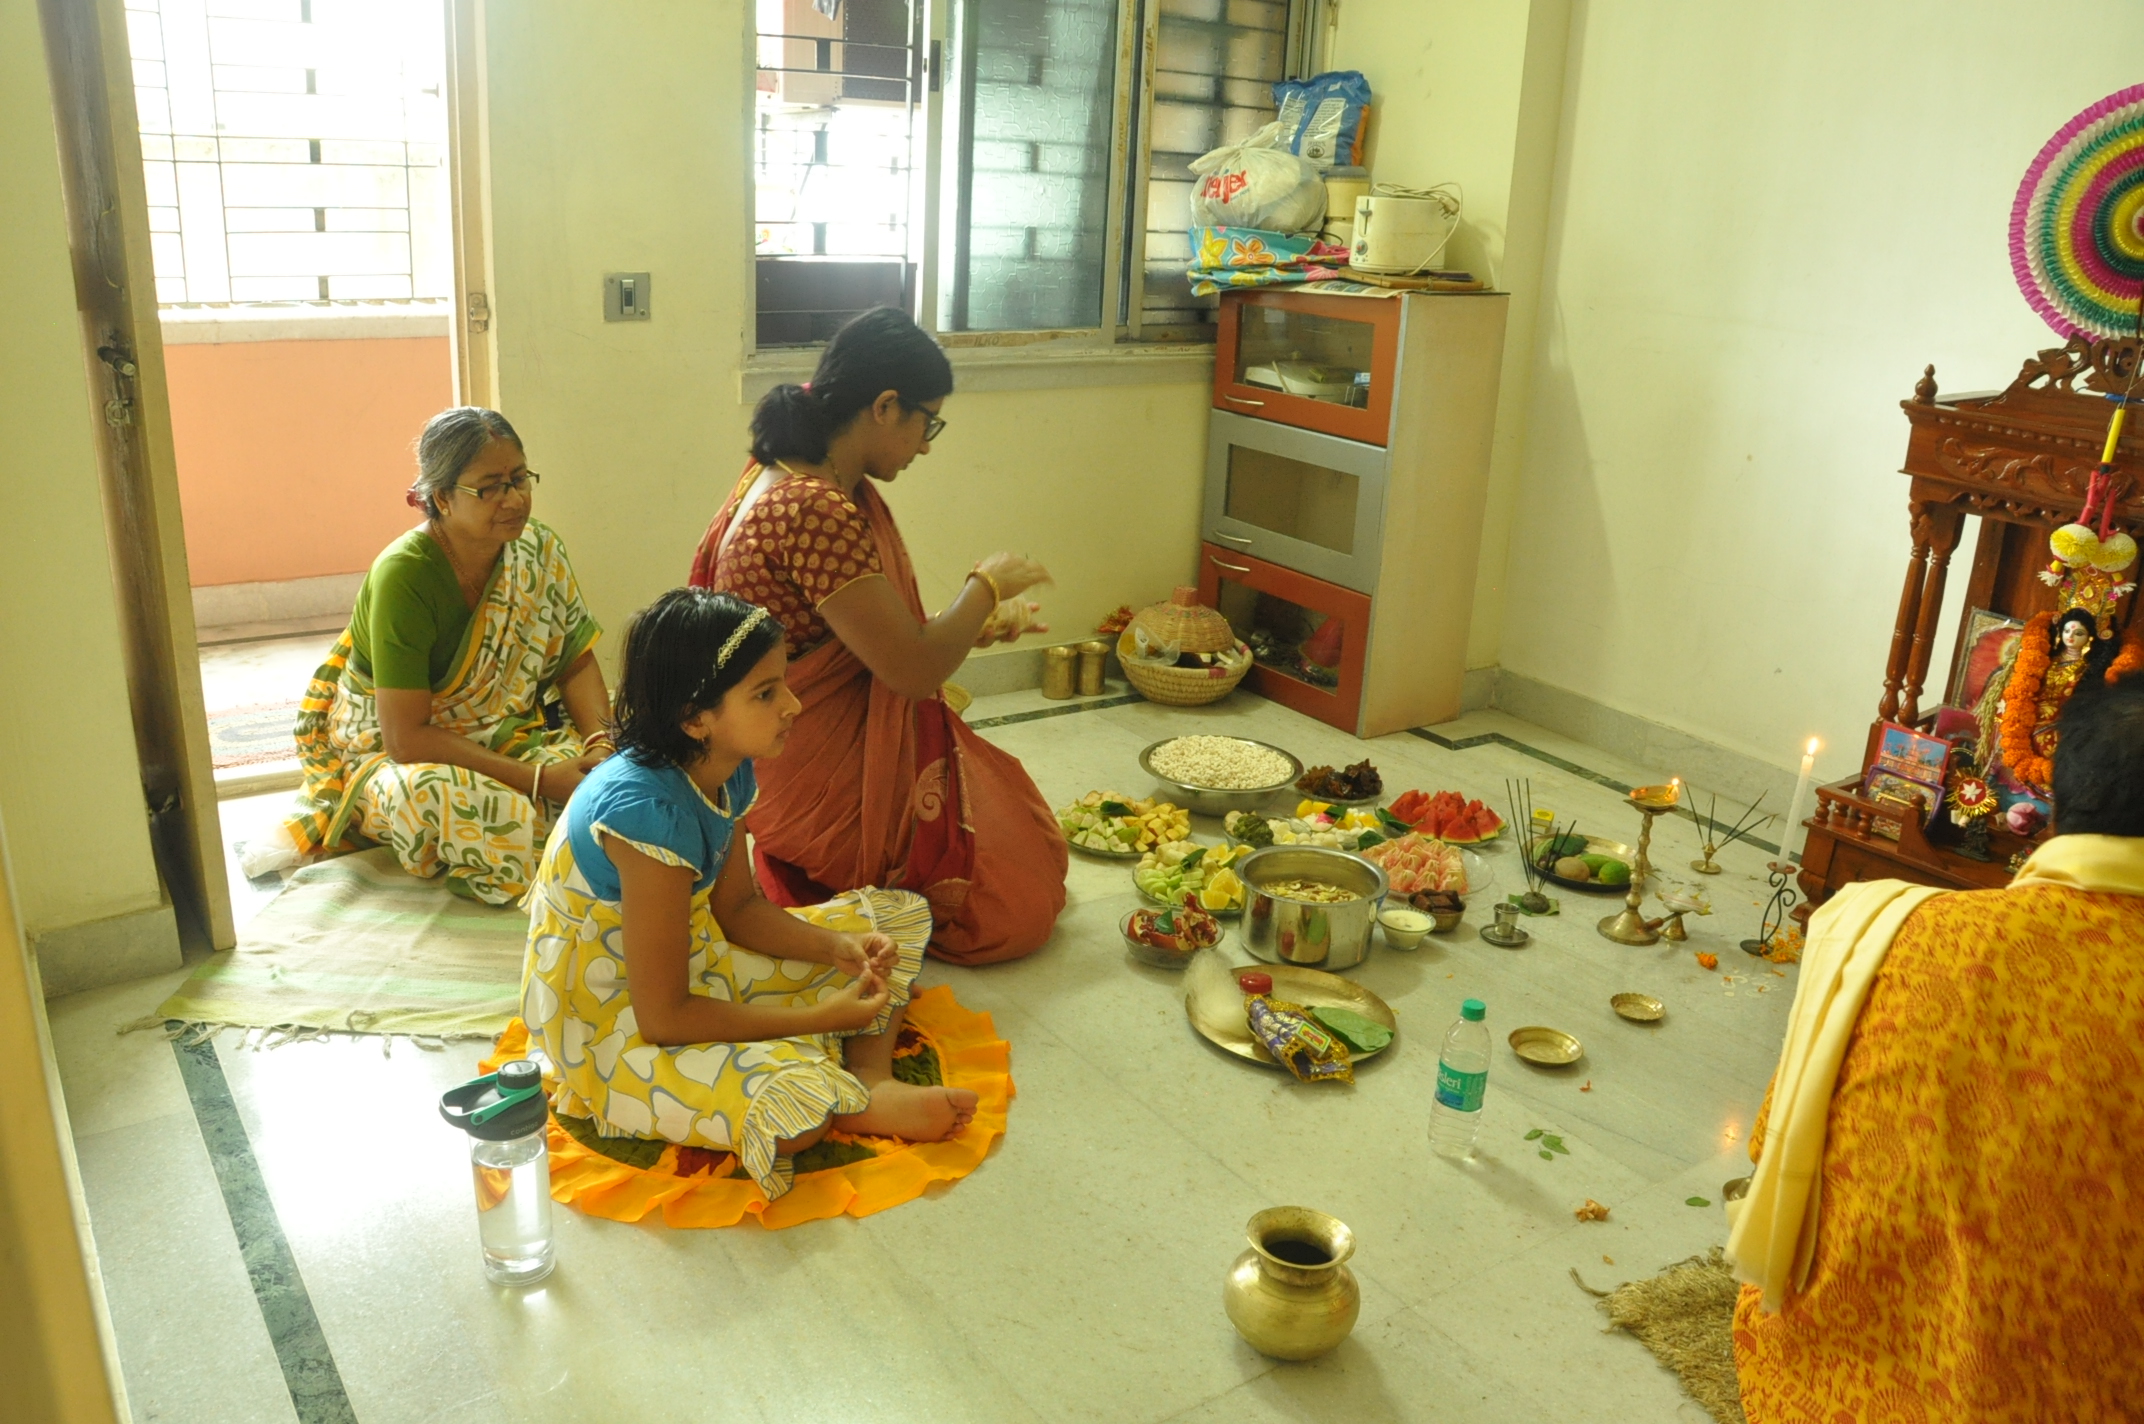 three women sit on a floor filled with bowls and plates of offerings for a ceremony.